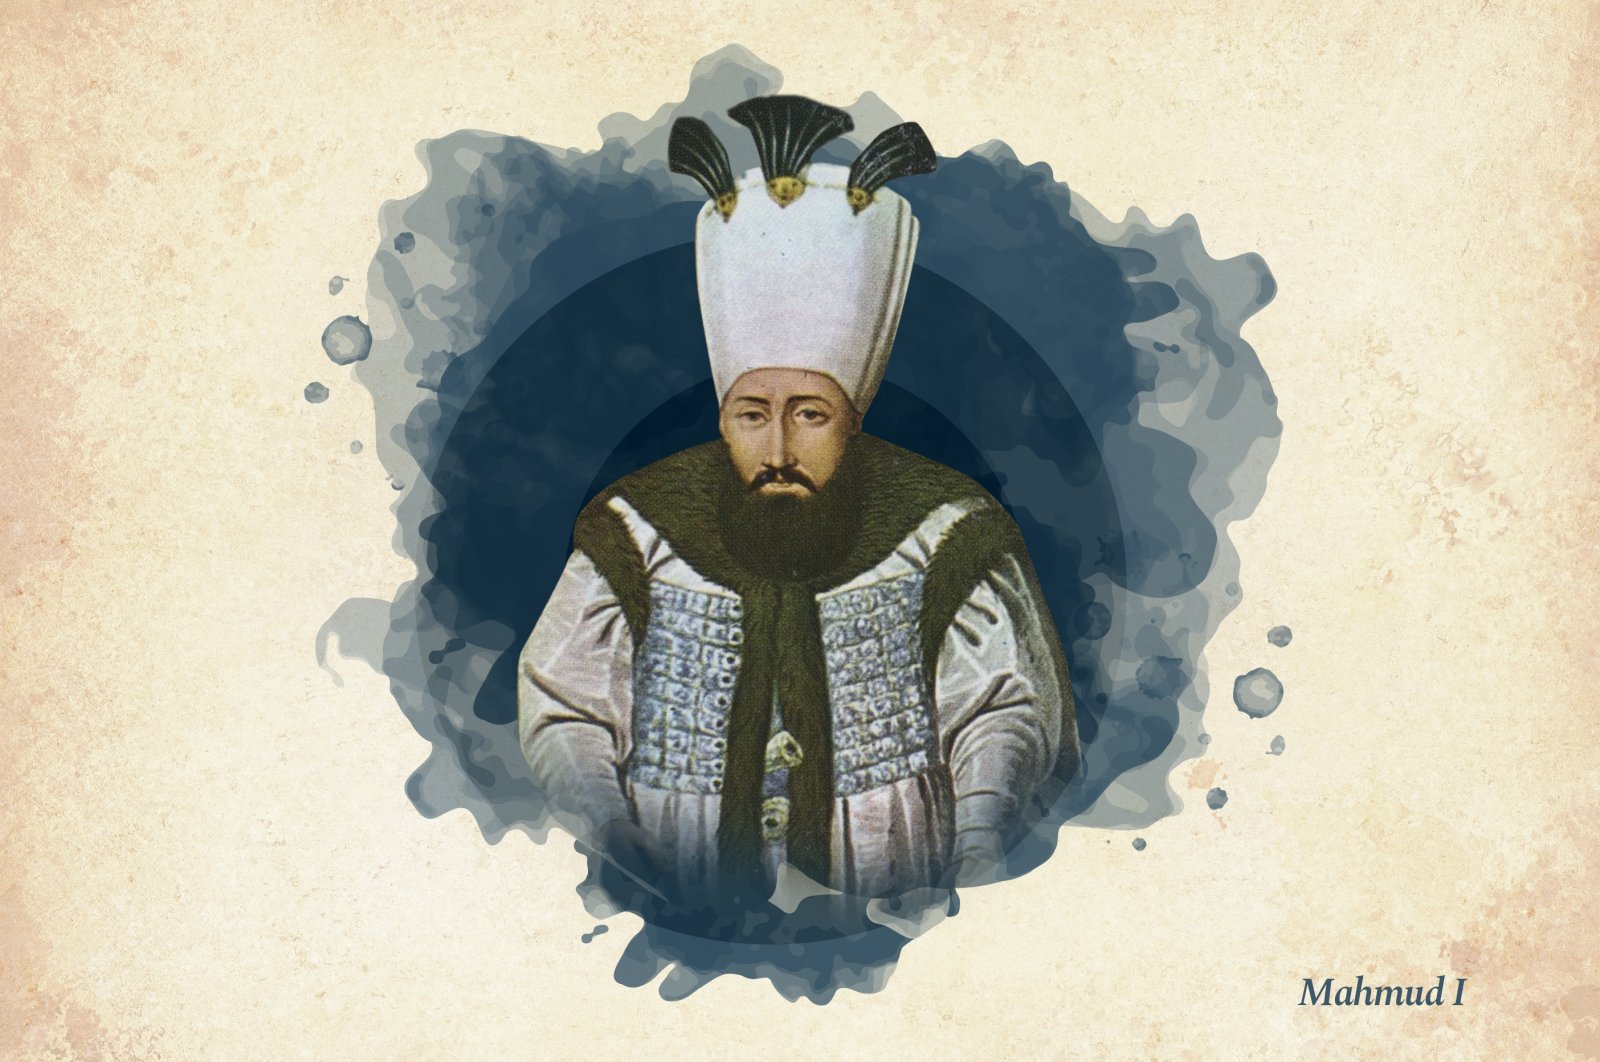 This widely used illustration shows Sultan Mahmud I, the 24th ruler of the Ottoman Empire. (Wikimedia/ Edited by Büşra Öztürk)